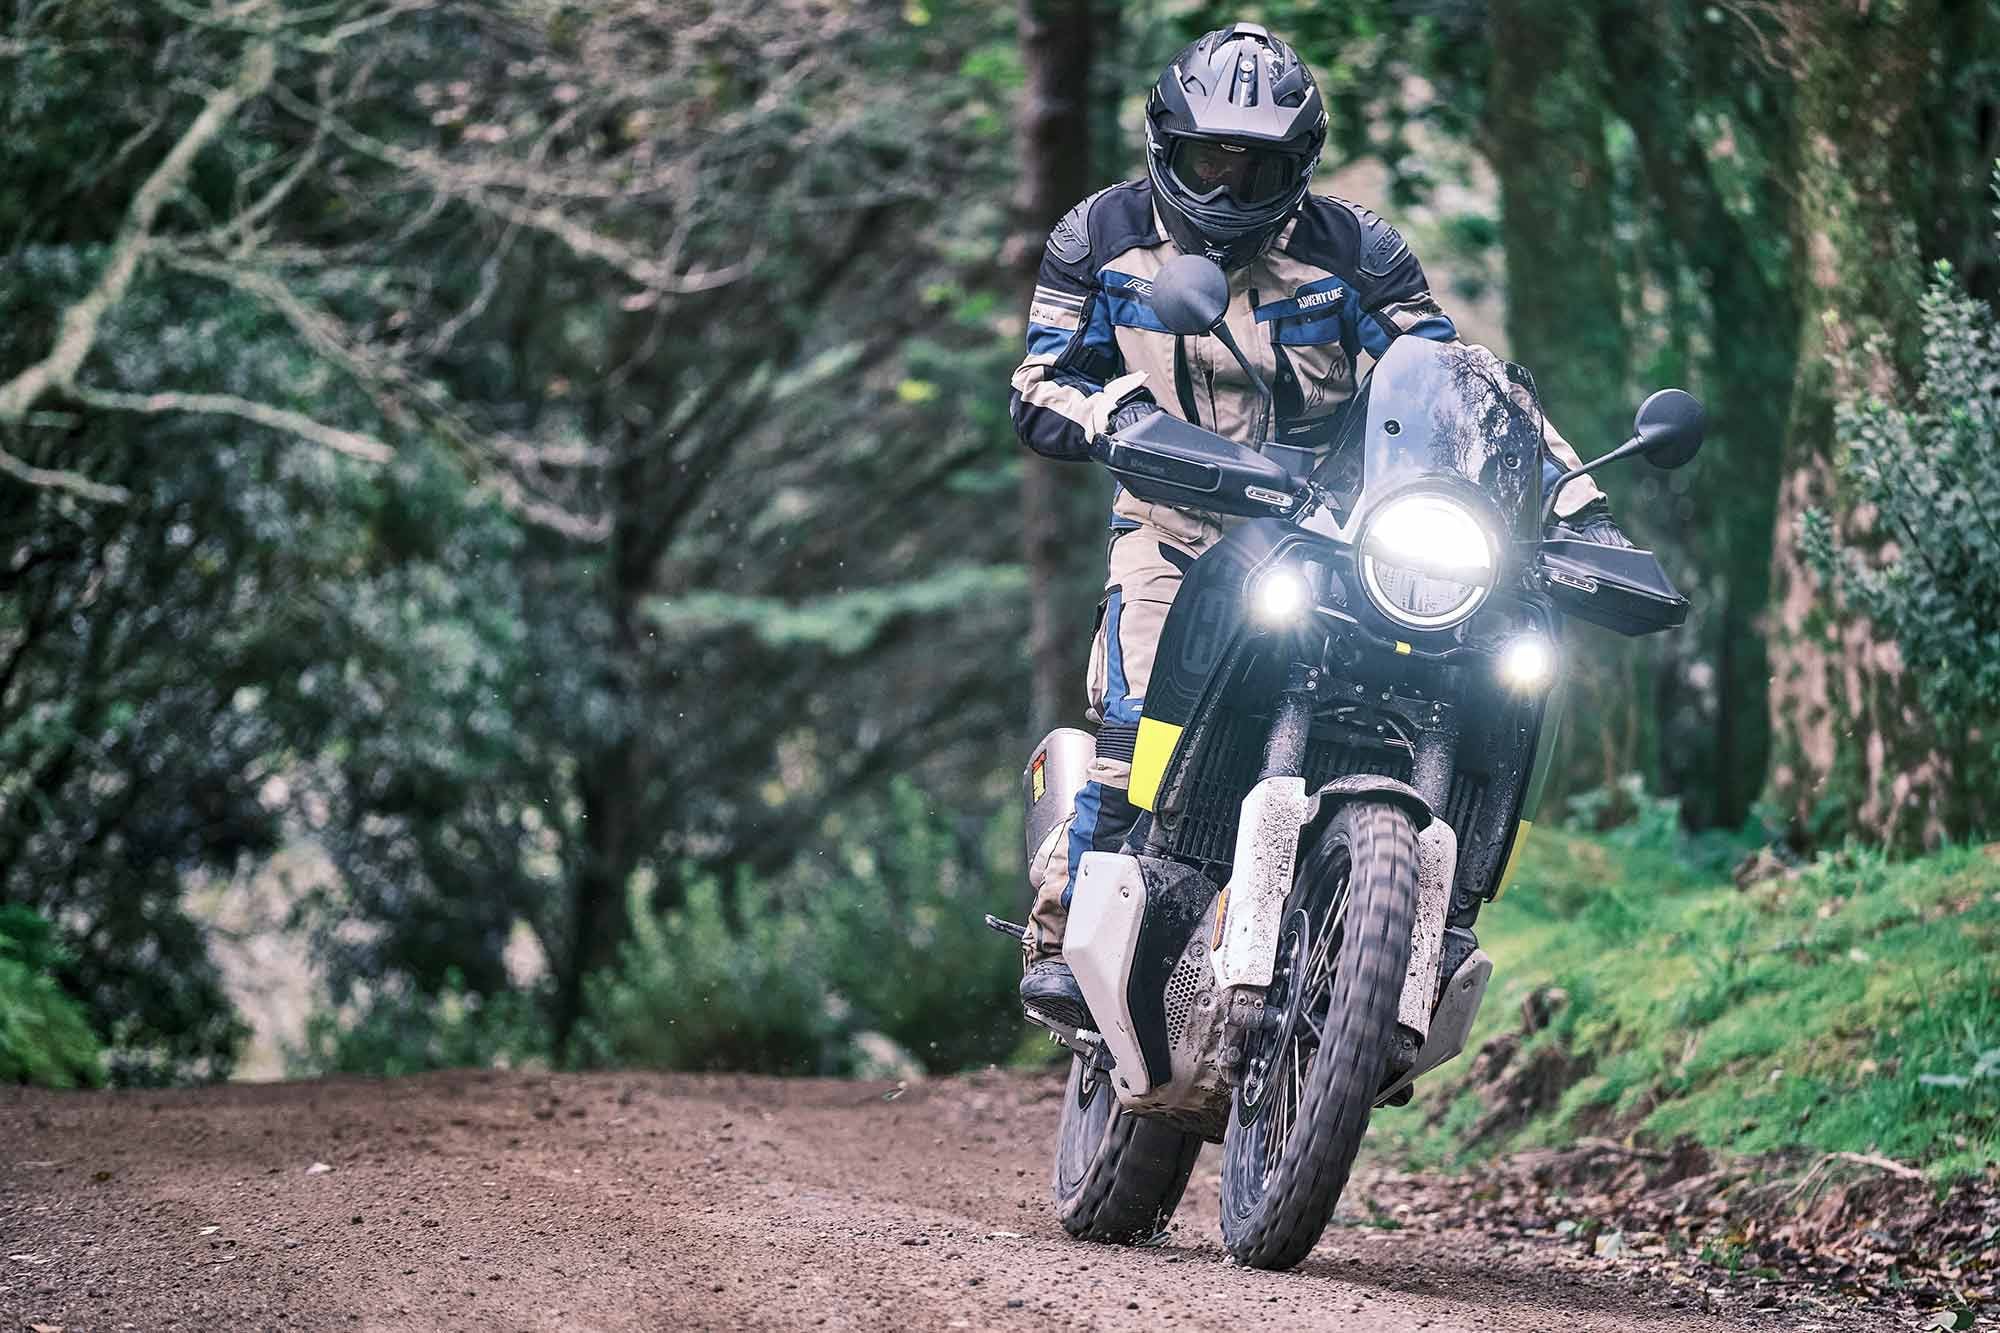 The Norden is 17.6 pounds (dry) heavier than both the KTM 890 and 890 R, which is mainly down to its different styling, bash plate, rear rack, and the incorporated fog lights, which come as standard.